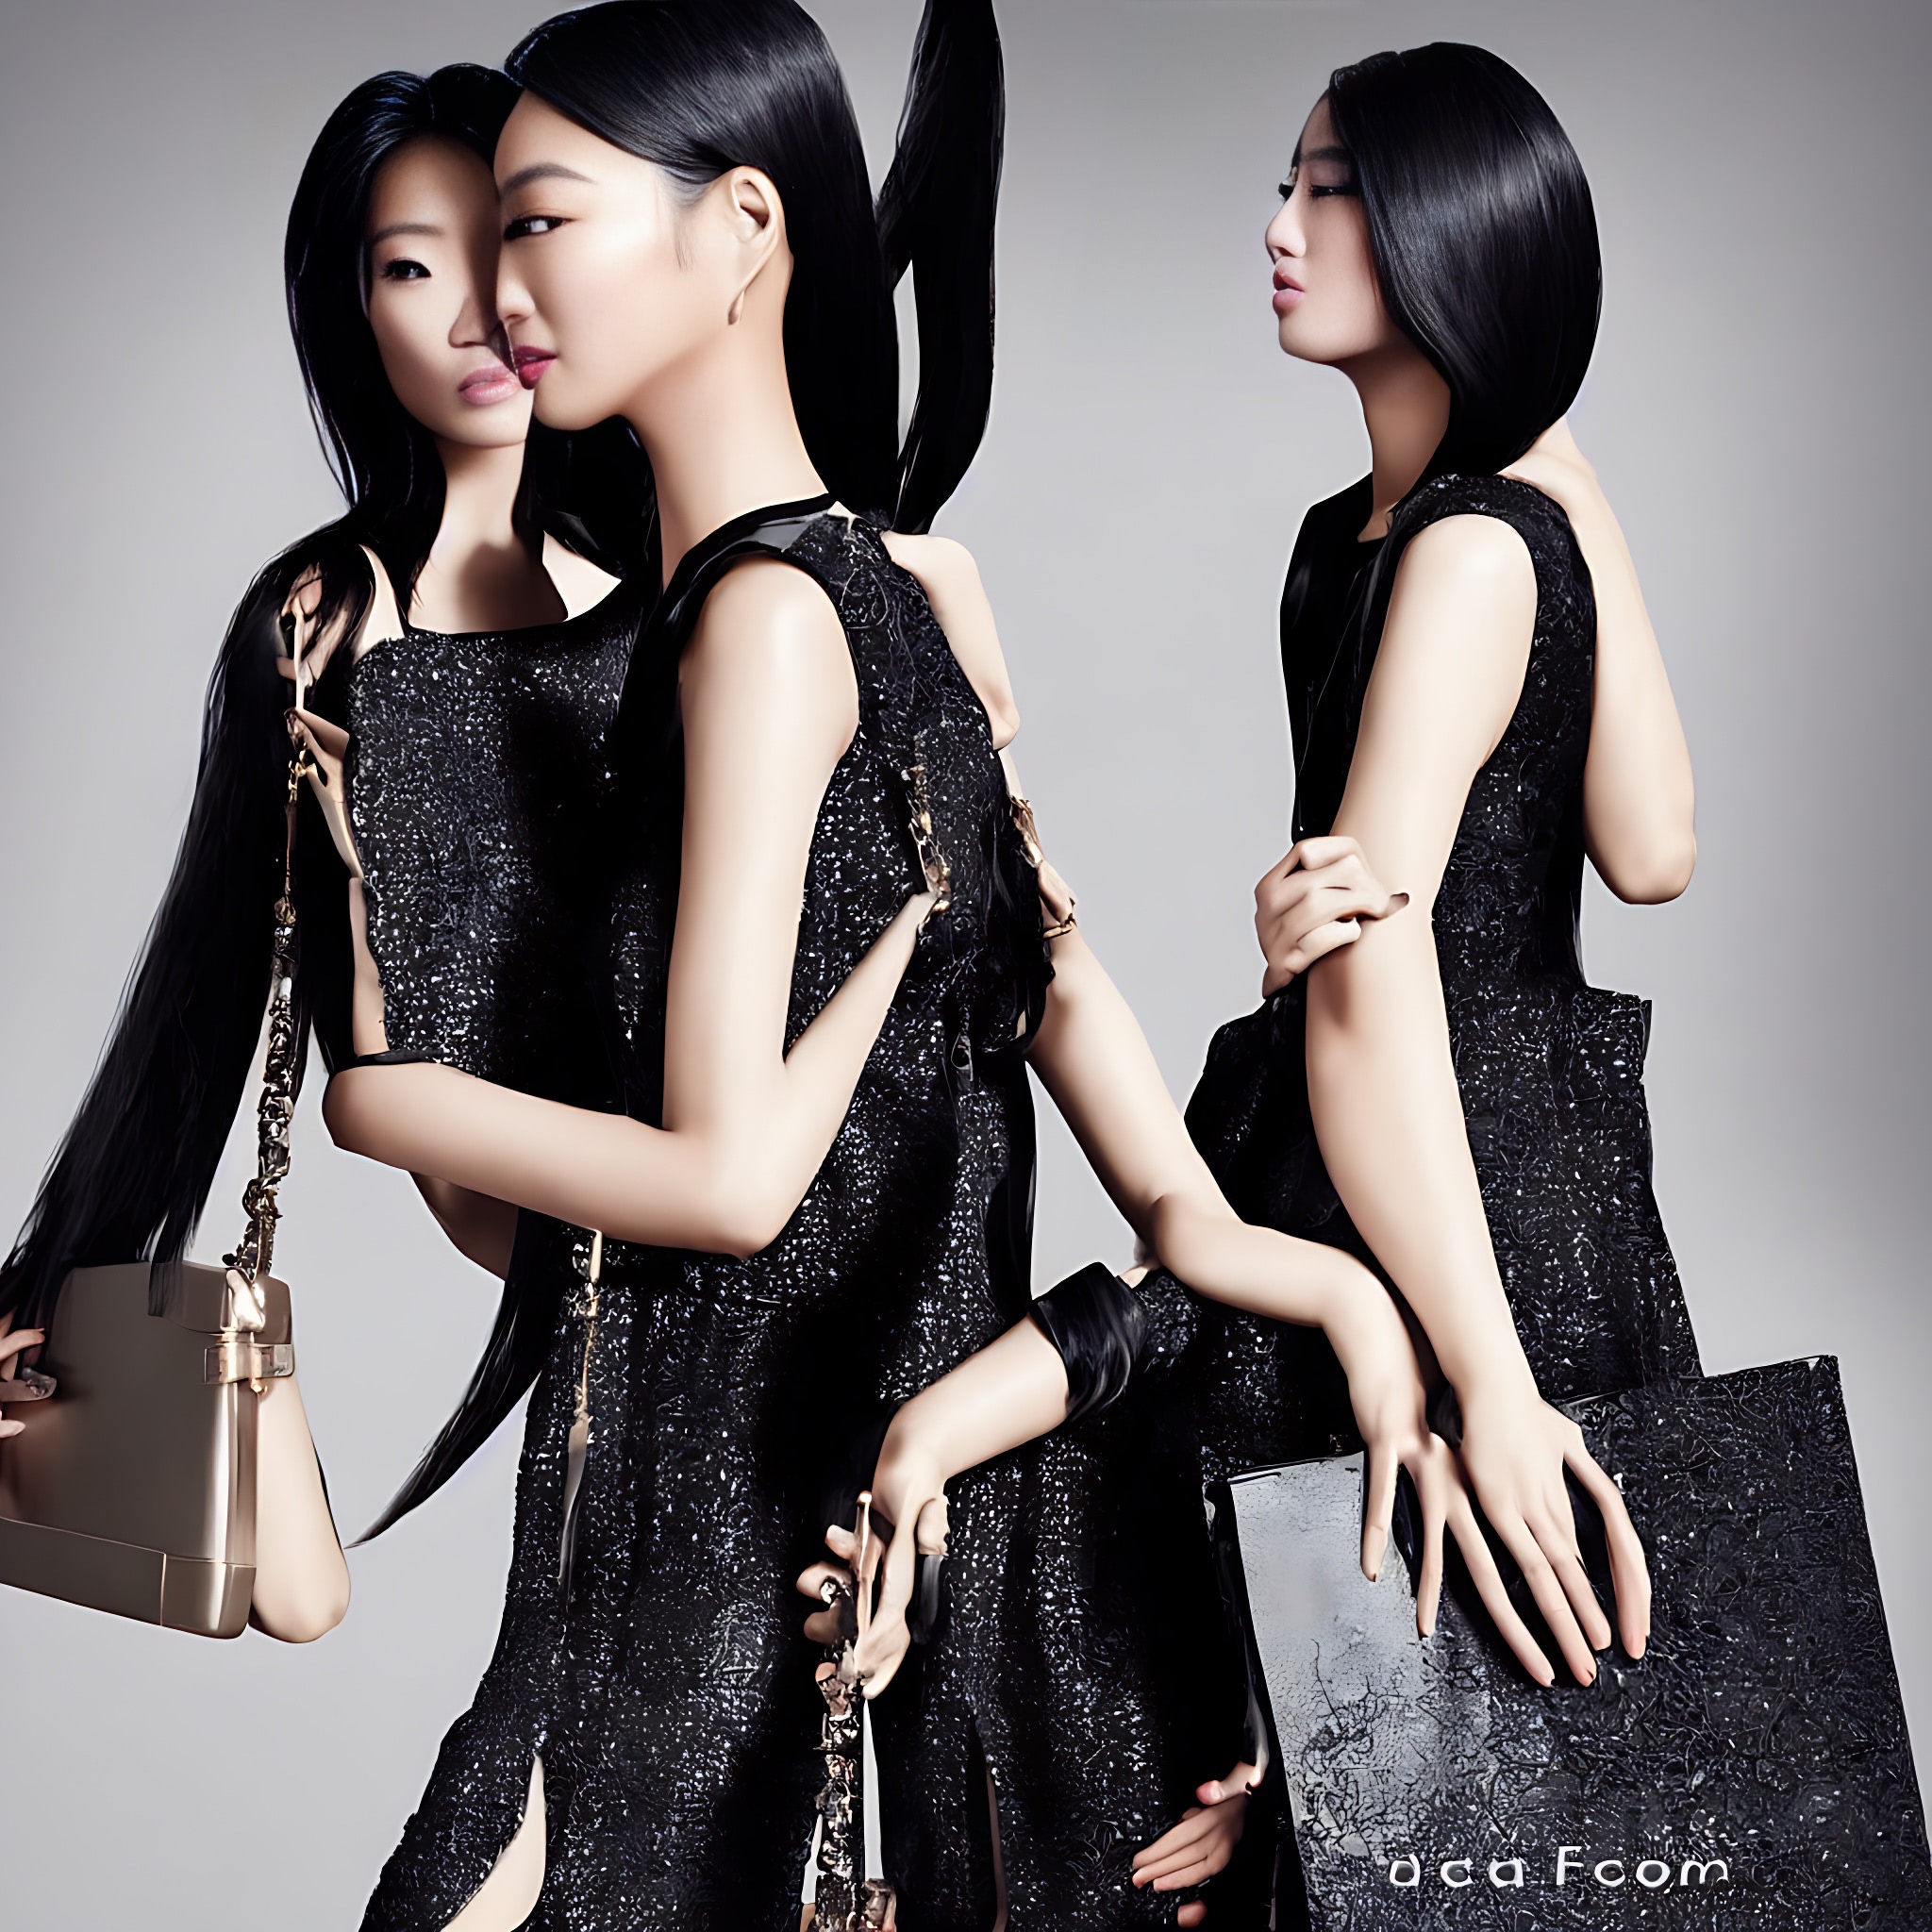 asian-fashion-advertisement-in-the-2030s-1